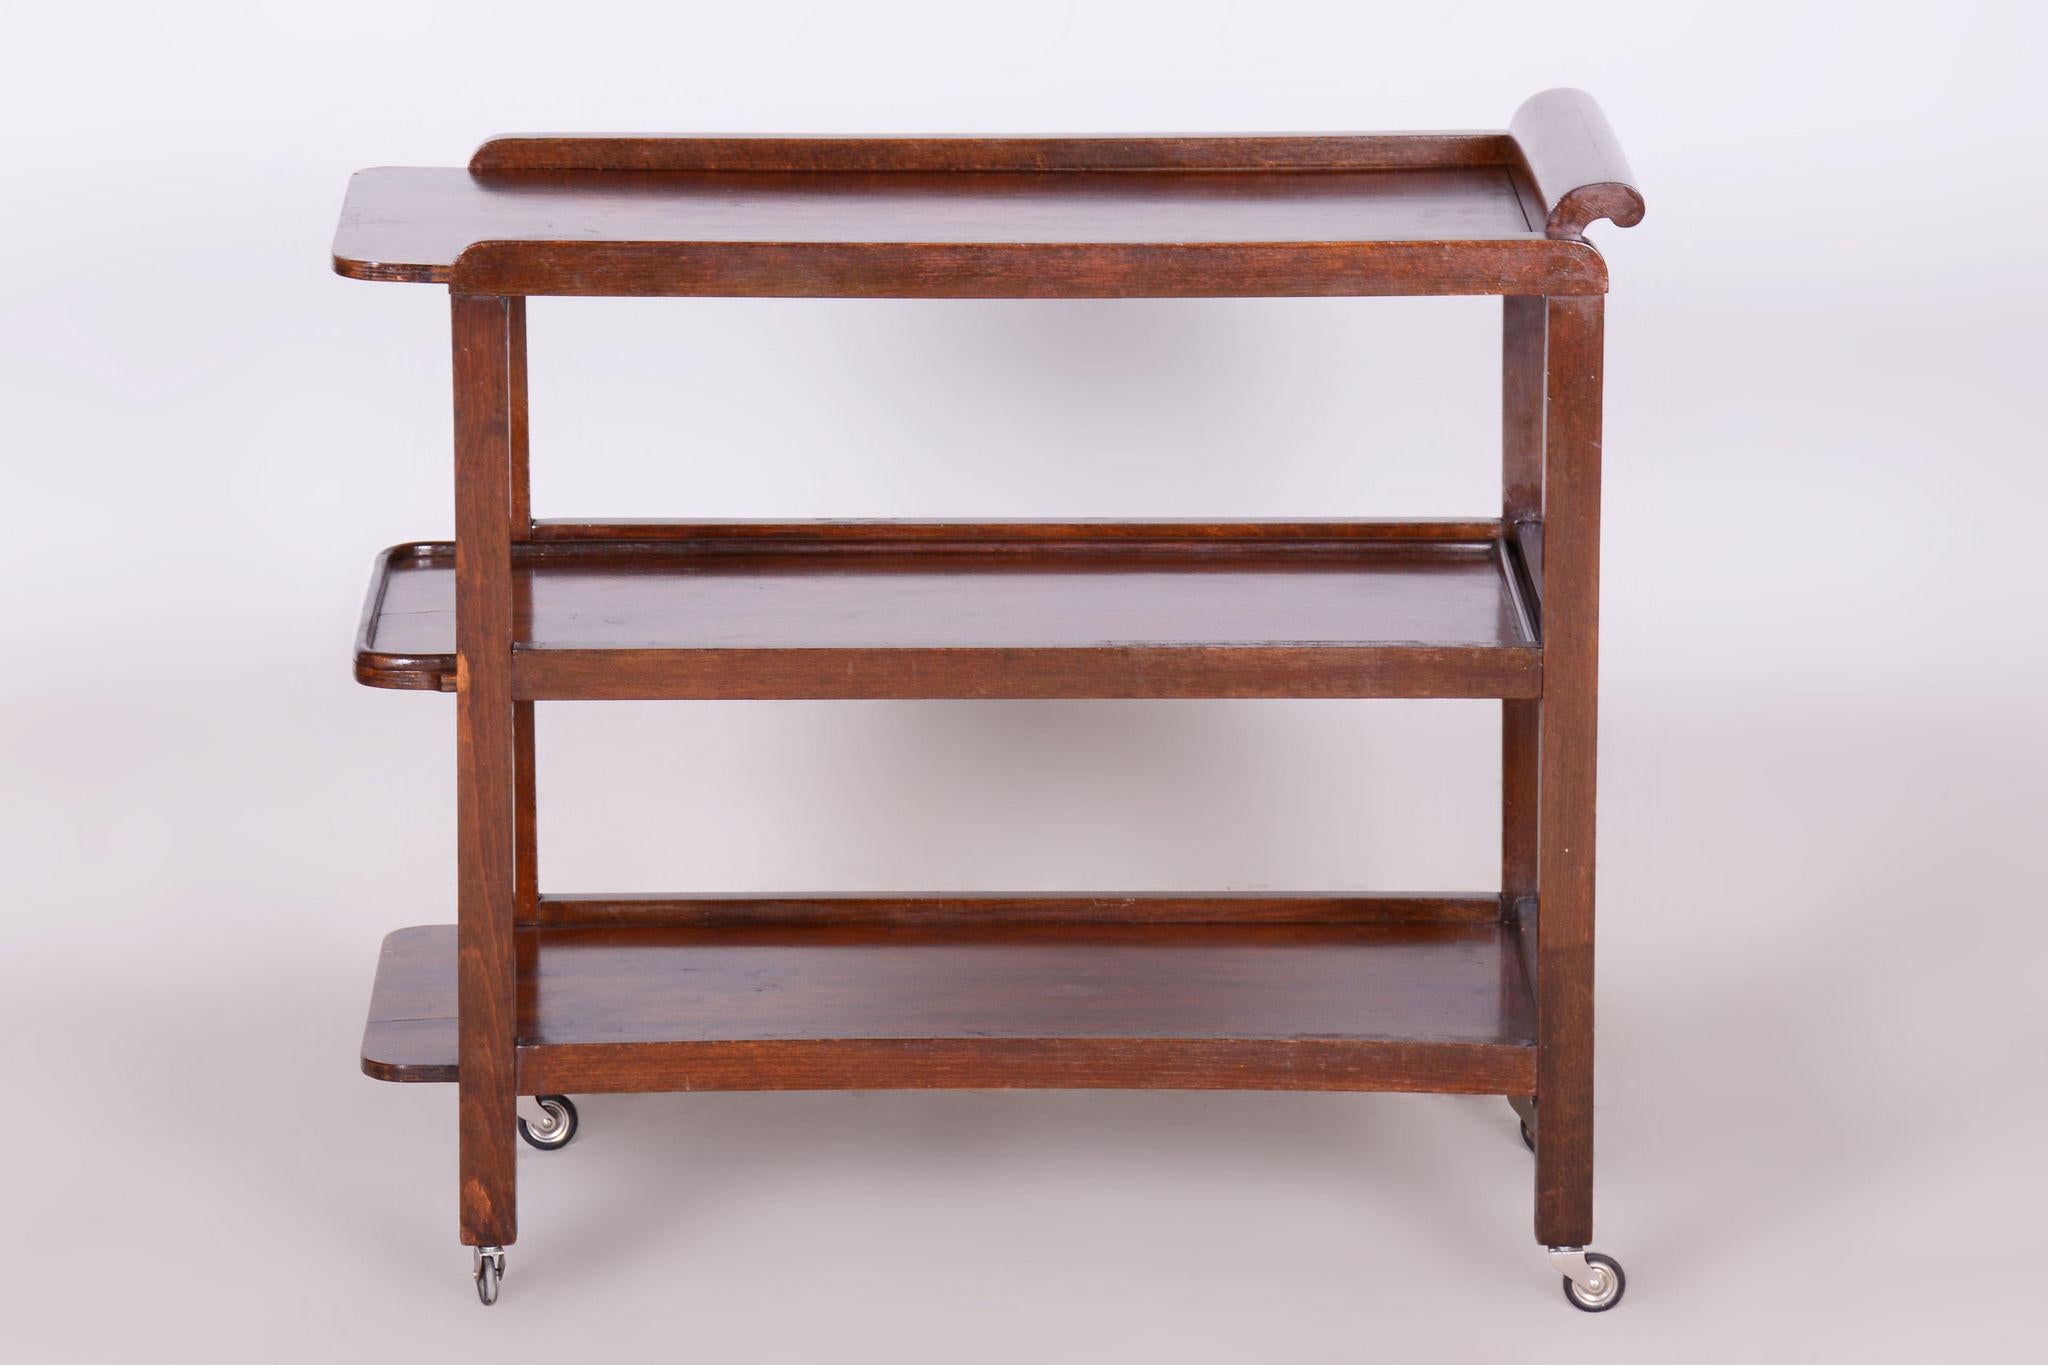 Restored Art Deco Trolley

Source: Czech
Period: 1930-1939
Material: Walnut, oak

Made by influential Austrian furniture manufacturer Thonet.			

The plates are removable and serve for serving.

Our professional refurbishing team in Czechia has